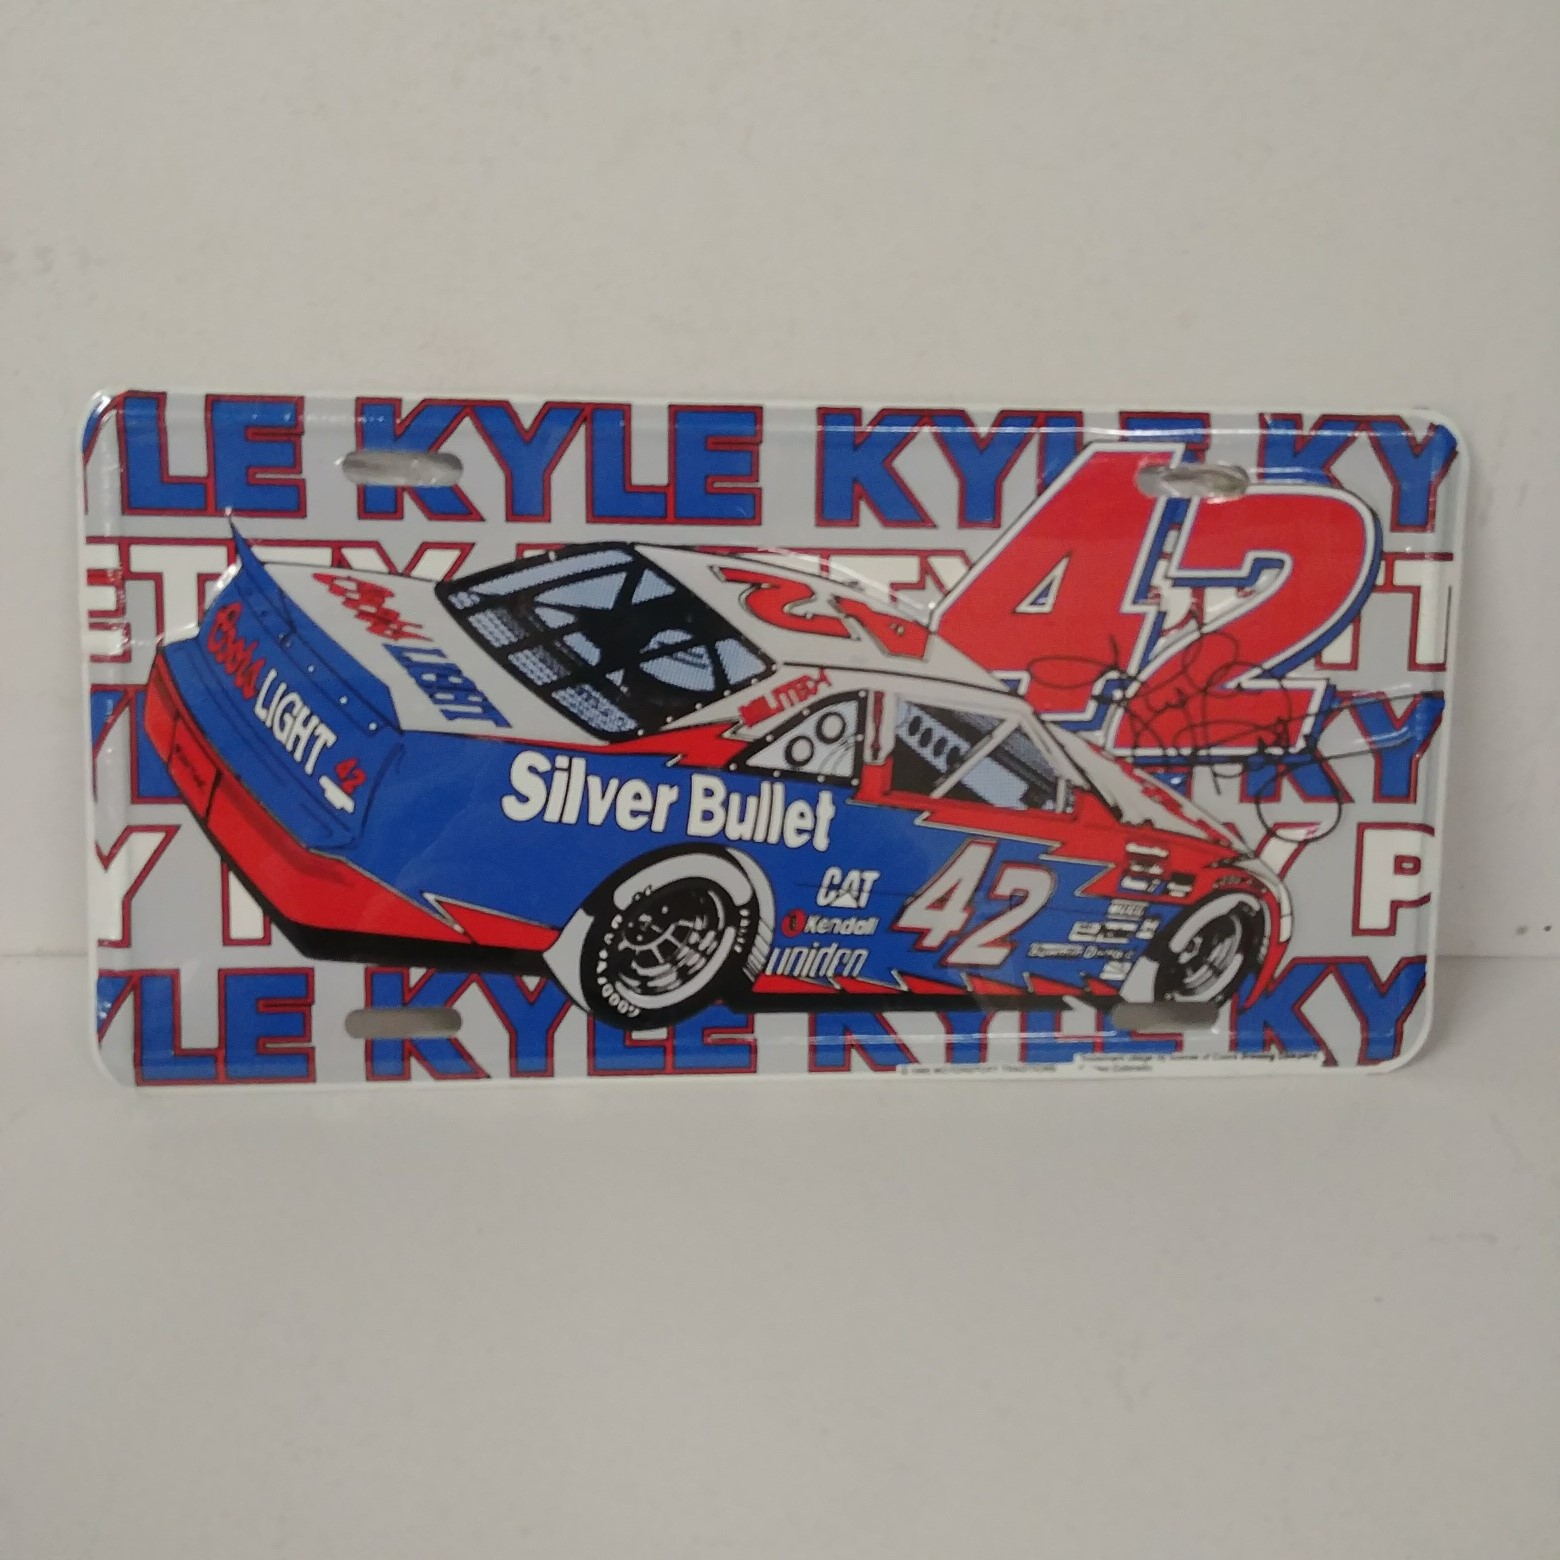 1995 Kyle Petty Coors Light metal license plate